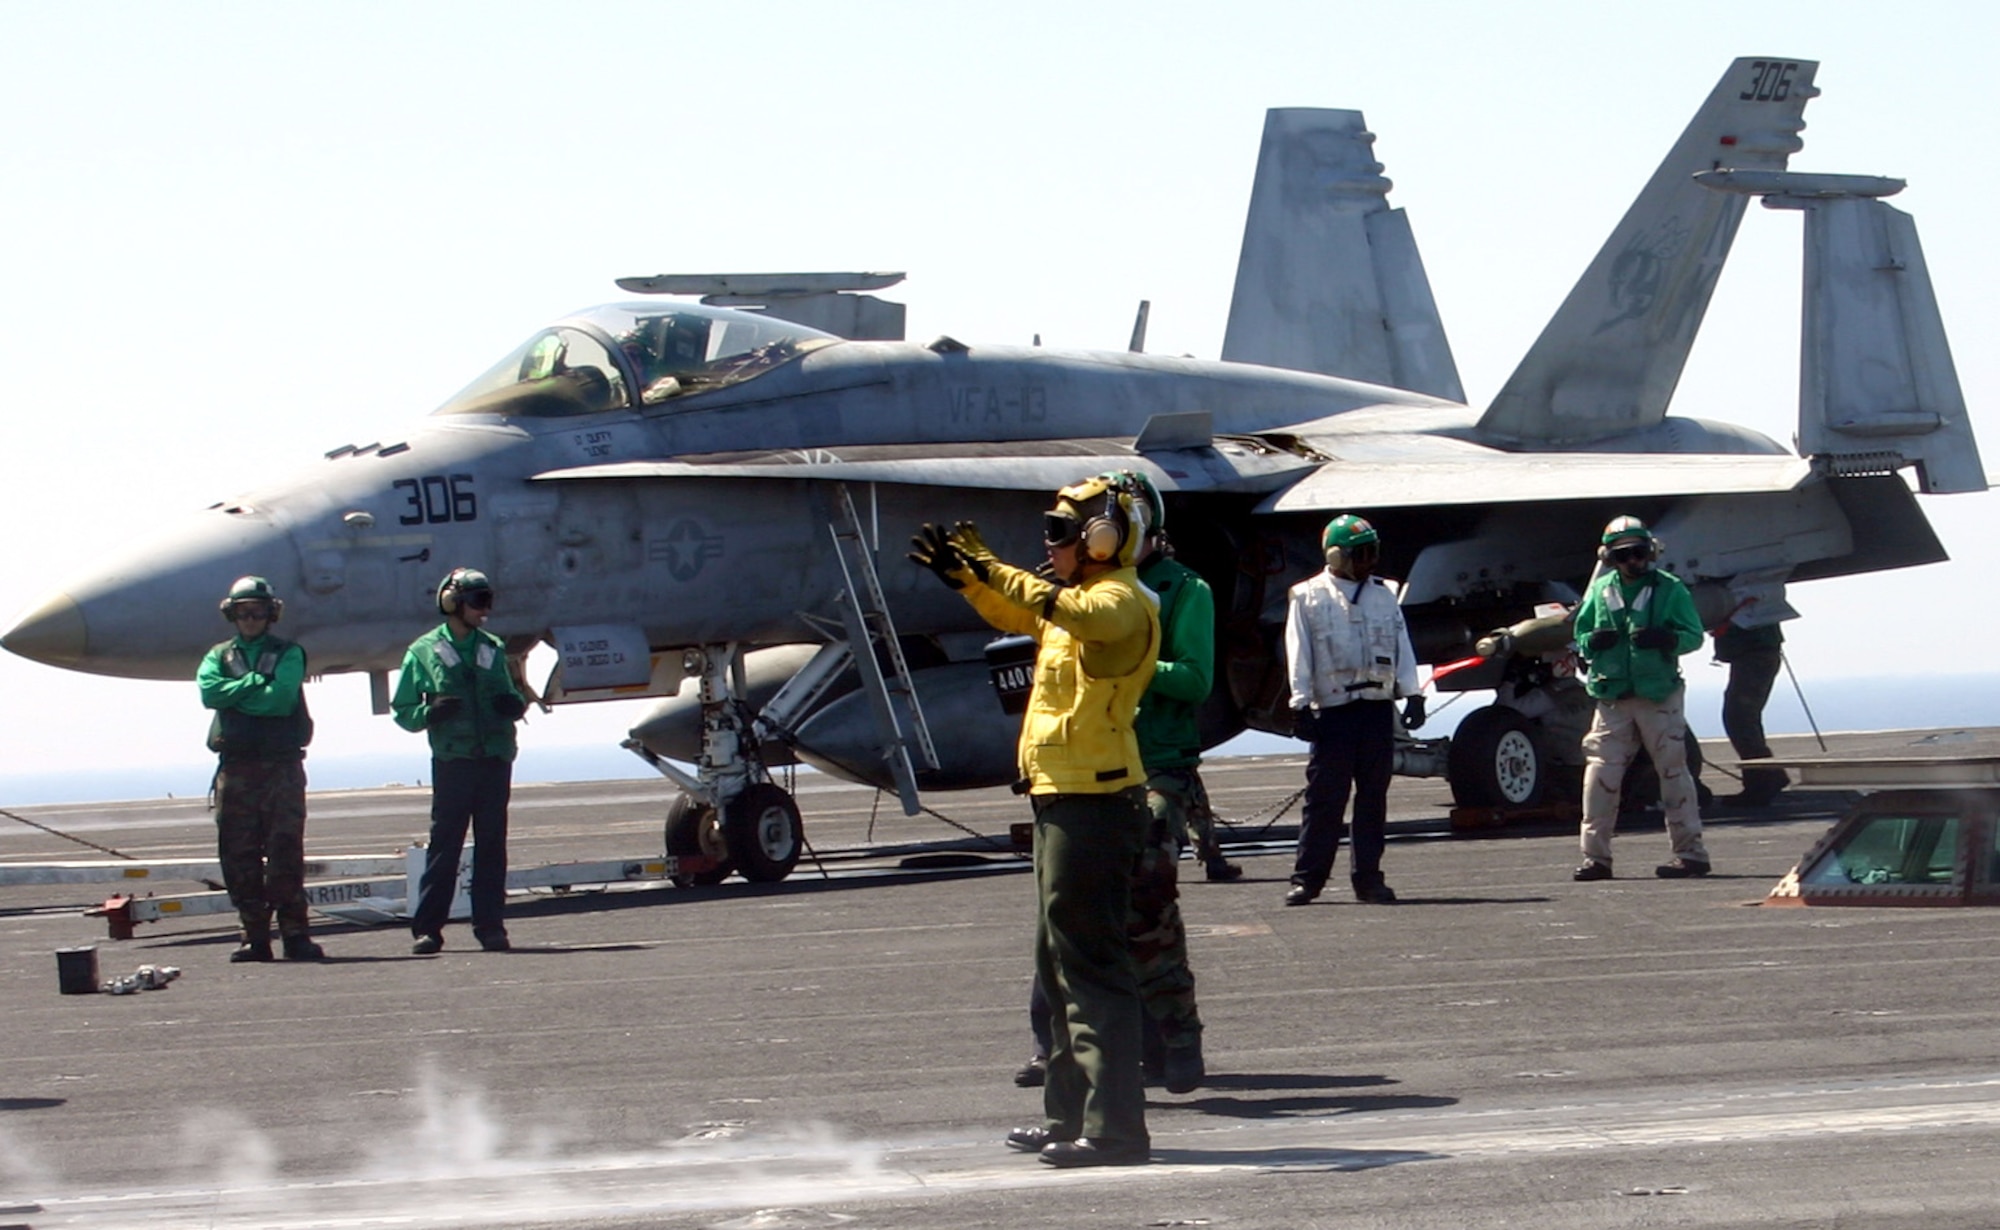 Sailors marshal an F/A-18 Hornet aircraft into position in preparation for take-off Friday, March 31, 2006, aboard the USS Ronald Reagan. F/A-18s and other aircraft are deployed with the ship to the Arabian Gulf in support of operations Iraqi Freedom and Enduring Freedom. (U.S. Air Force photo/Staff Sgt. Melissa Koskovich)
